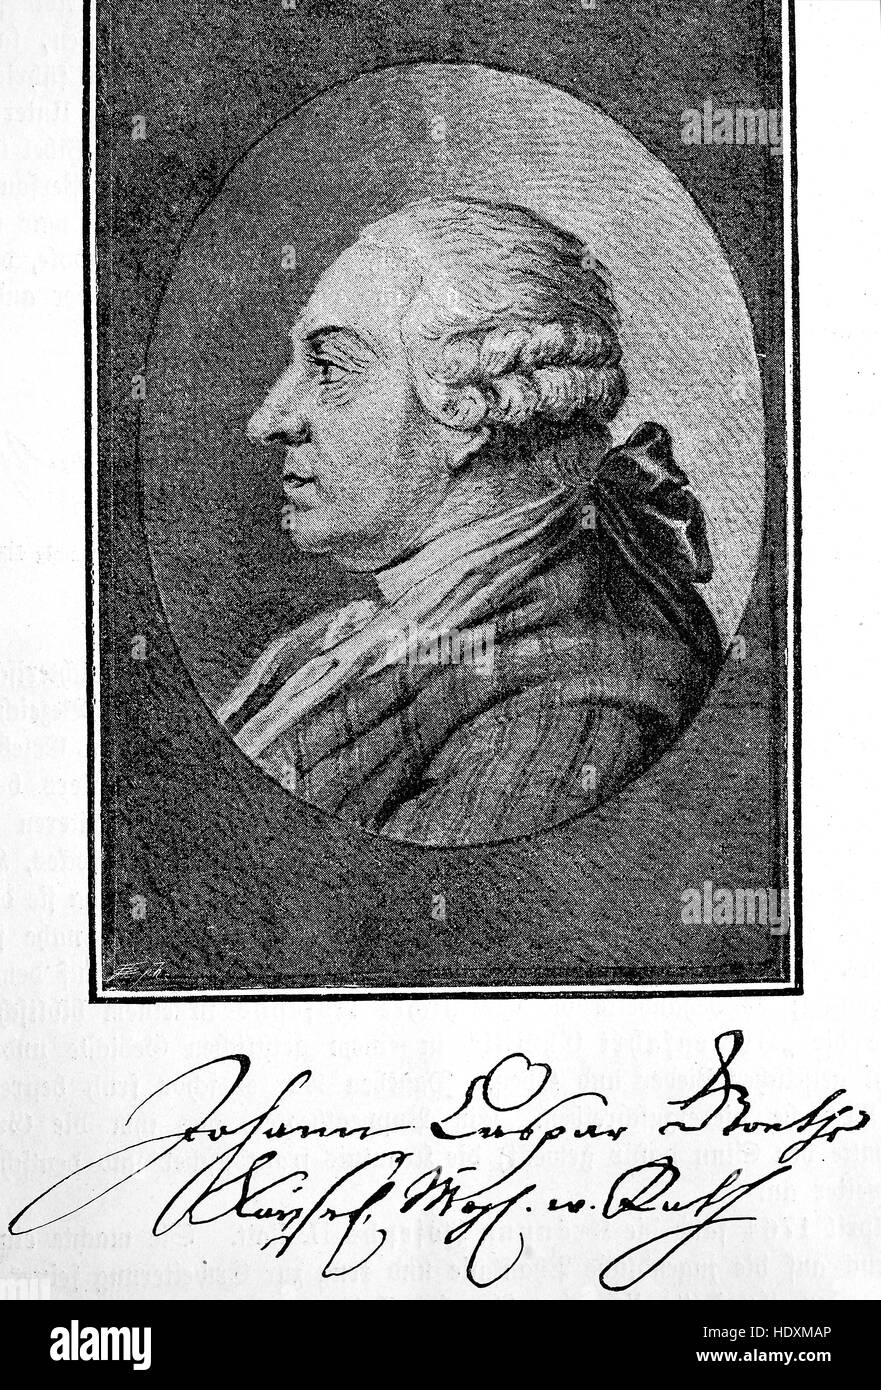 Johann Caspar Goethe, 1710-1782, the father of Johann Wolfgang von Goethe, was a wealthy lawyer and imperial council in Frankfurt am Main, woodcut from the year 1882, digital improved Stock Photo